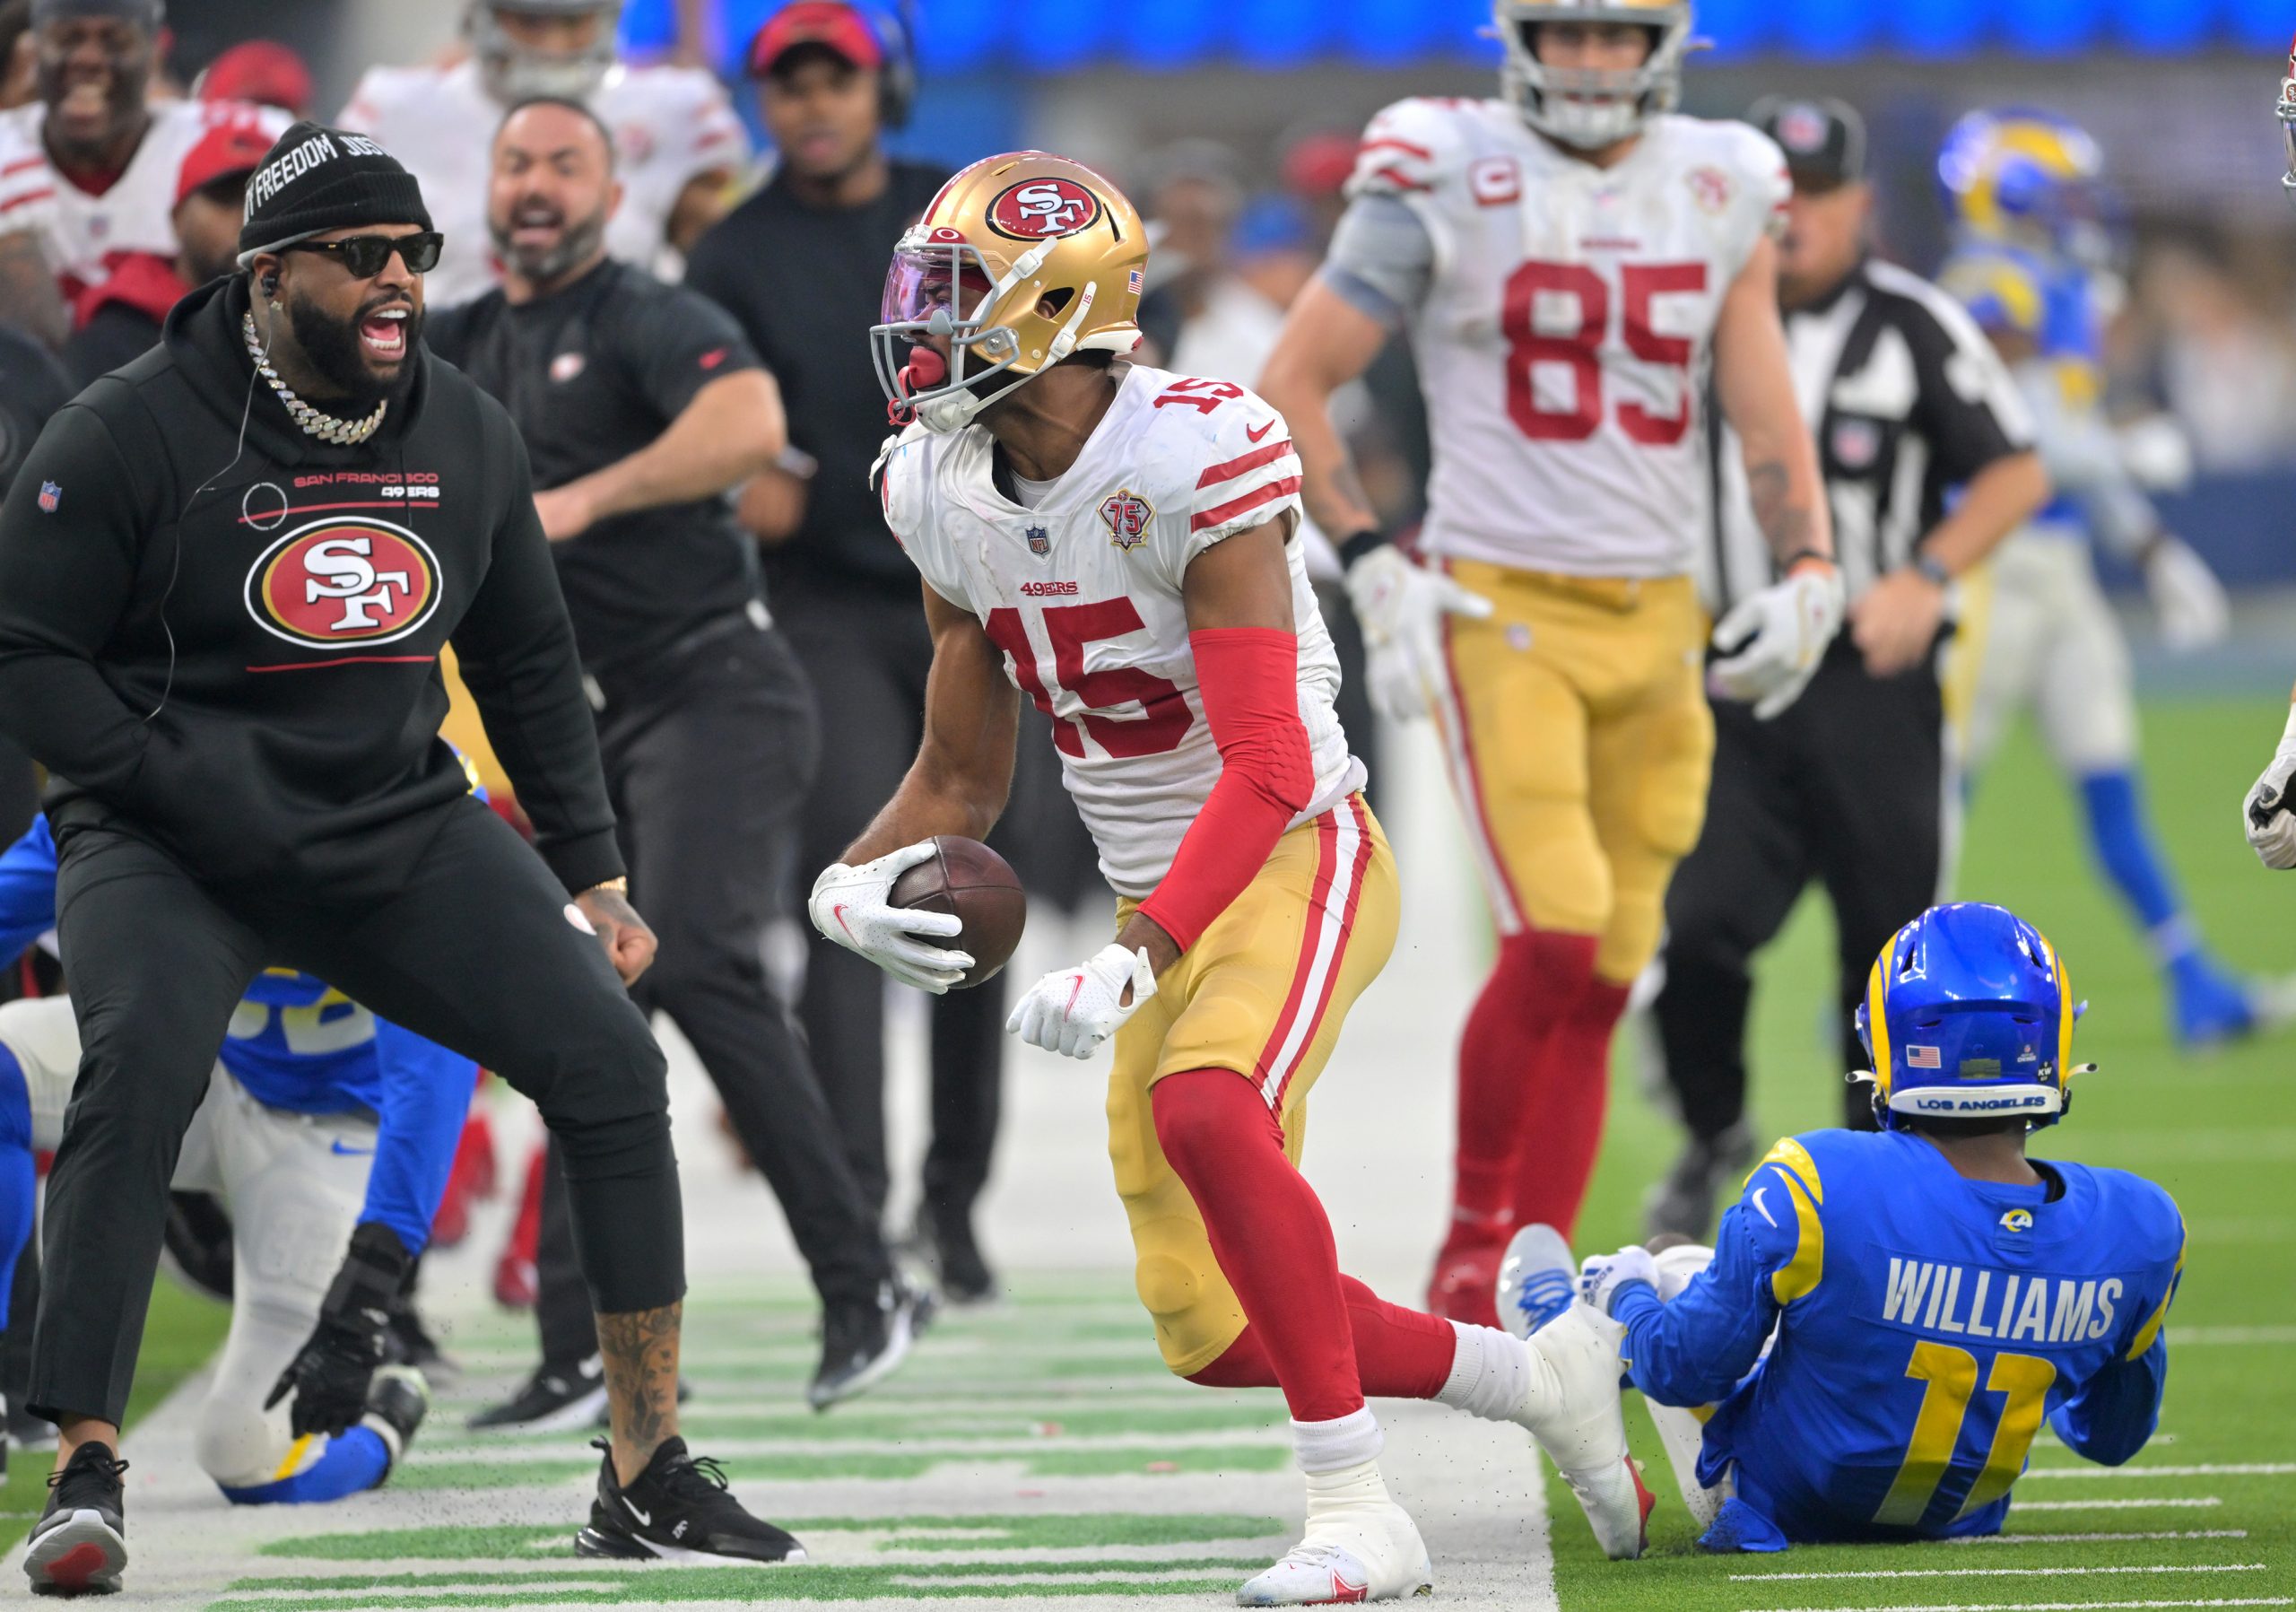 Swarm of 49ers Fans Made a 'Tough Environment' for Rams at SoFi Stadium